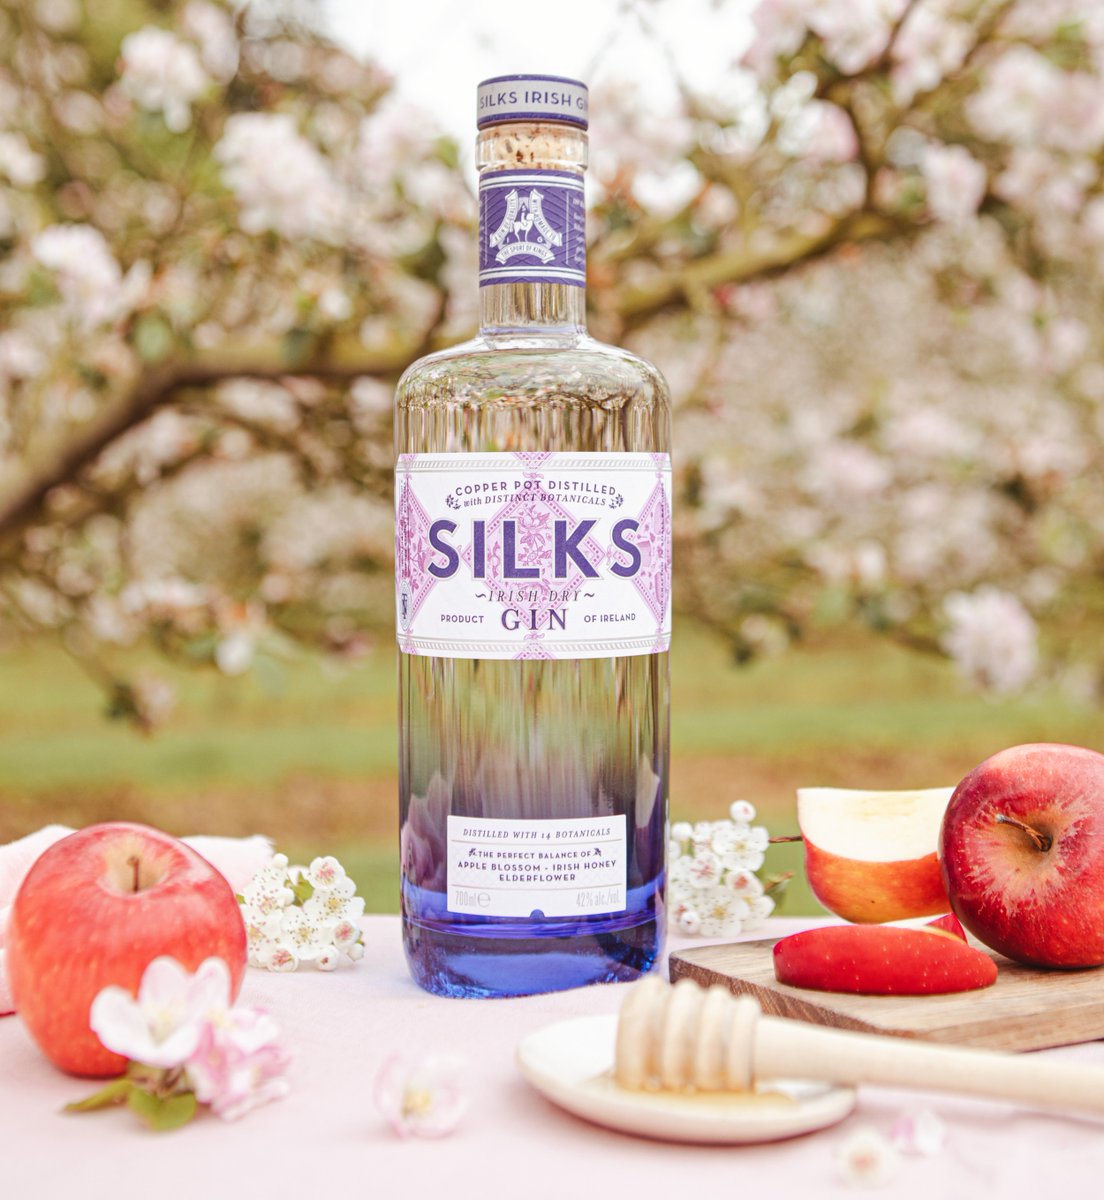 #SilksGin is crafted in the Boyne Valley using 14 botanicals including apple blossom from our trees, #honey from our bees & #elderflower & hawthorn blossom from our hedgerows 🍸 bit.ly/3NhNRUX

#craftgin #irishgin #gin #ginandtonic #appleblossom #boynevalleyflavours